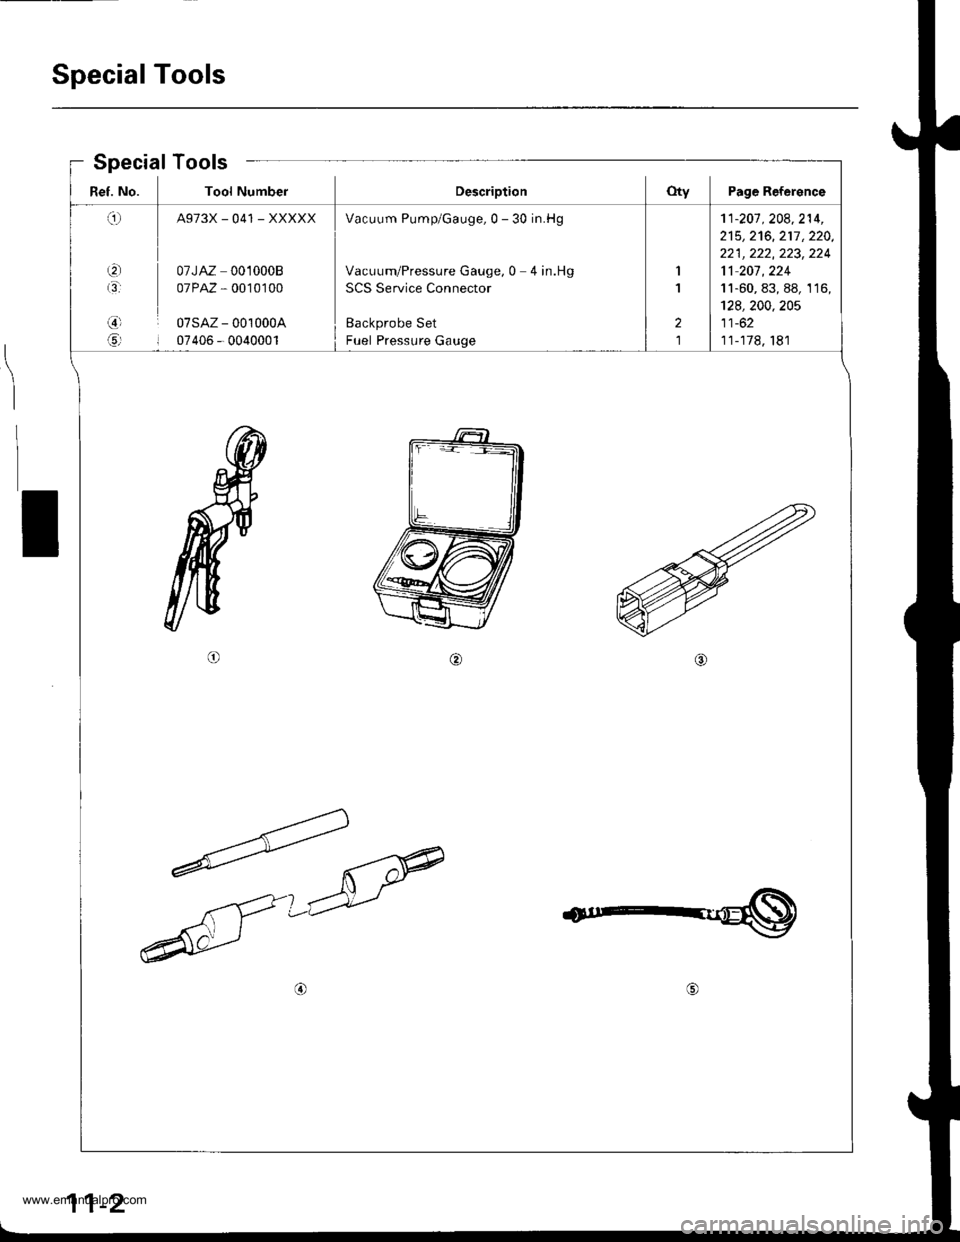 HONDA CR-V 2000 RD1-RD3 / 1.G Service Manual 
Special Tools
Ref. No. Tool NumberDescriptionOty Page Reference
q
t3
,3)l
6rl
A973X_041 _XXXXX
07JAZ 0010008
07PAZ , 0010100
07sAz - 001000A
07405 - 0040001
Vacuum Pump/Gauge,0 - 30 in.Hg
Vacuum/Pre